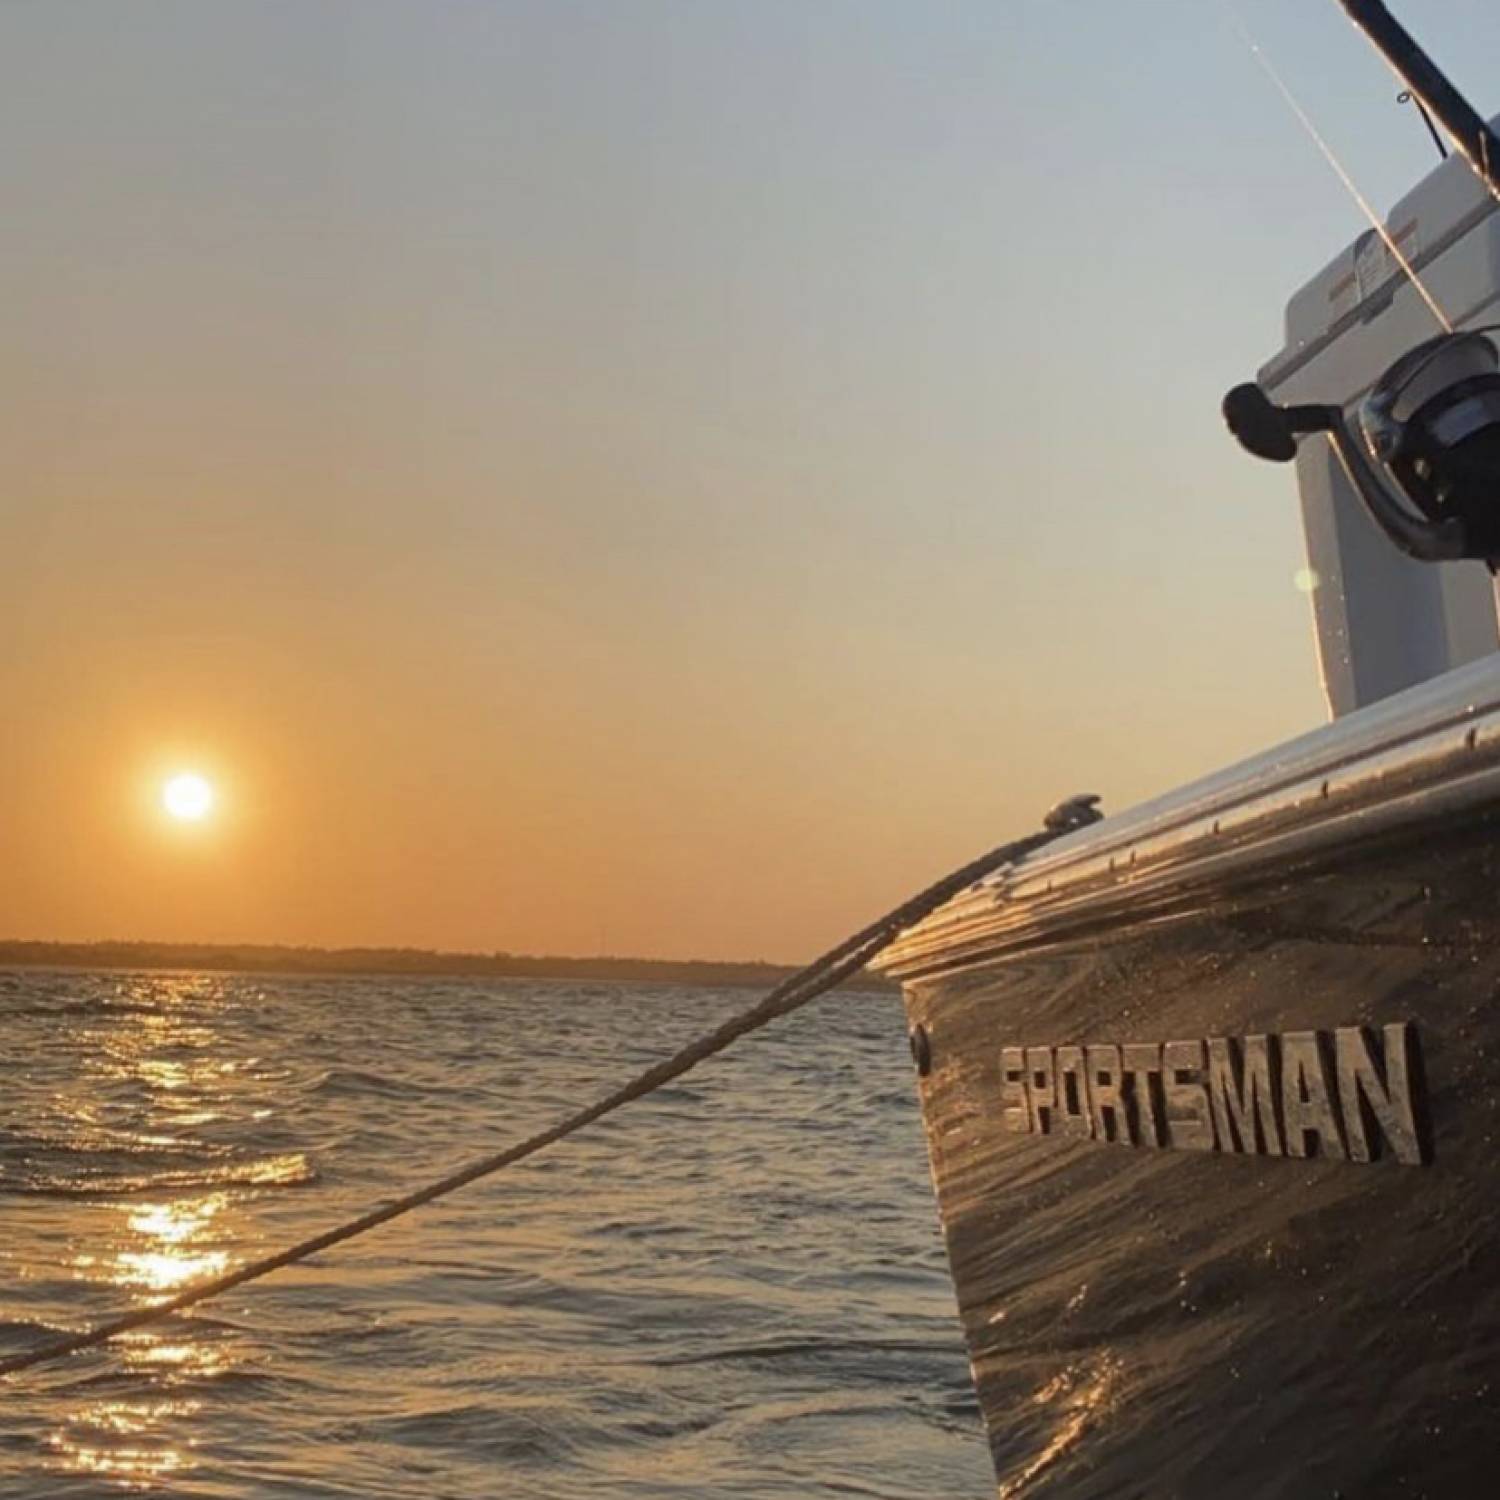 Title: NC sunset - On board their Sportsman Open 242 Center Console - Location: Surf City NC. Participating in the Photo Contest #SportsmanMarch2023